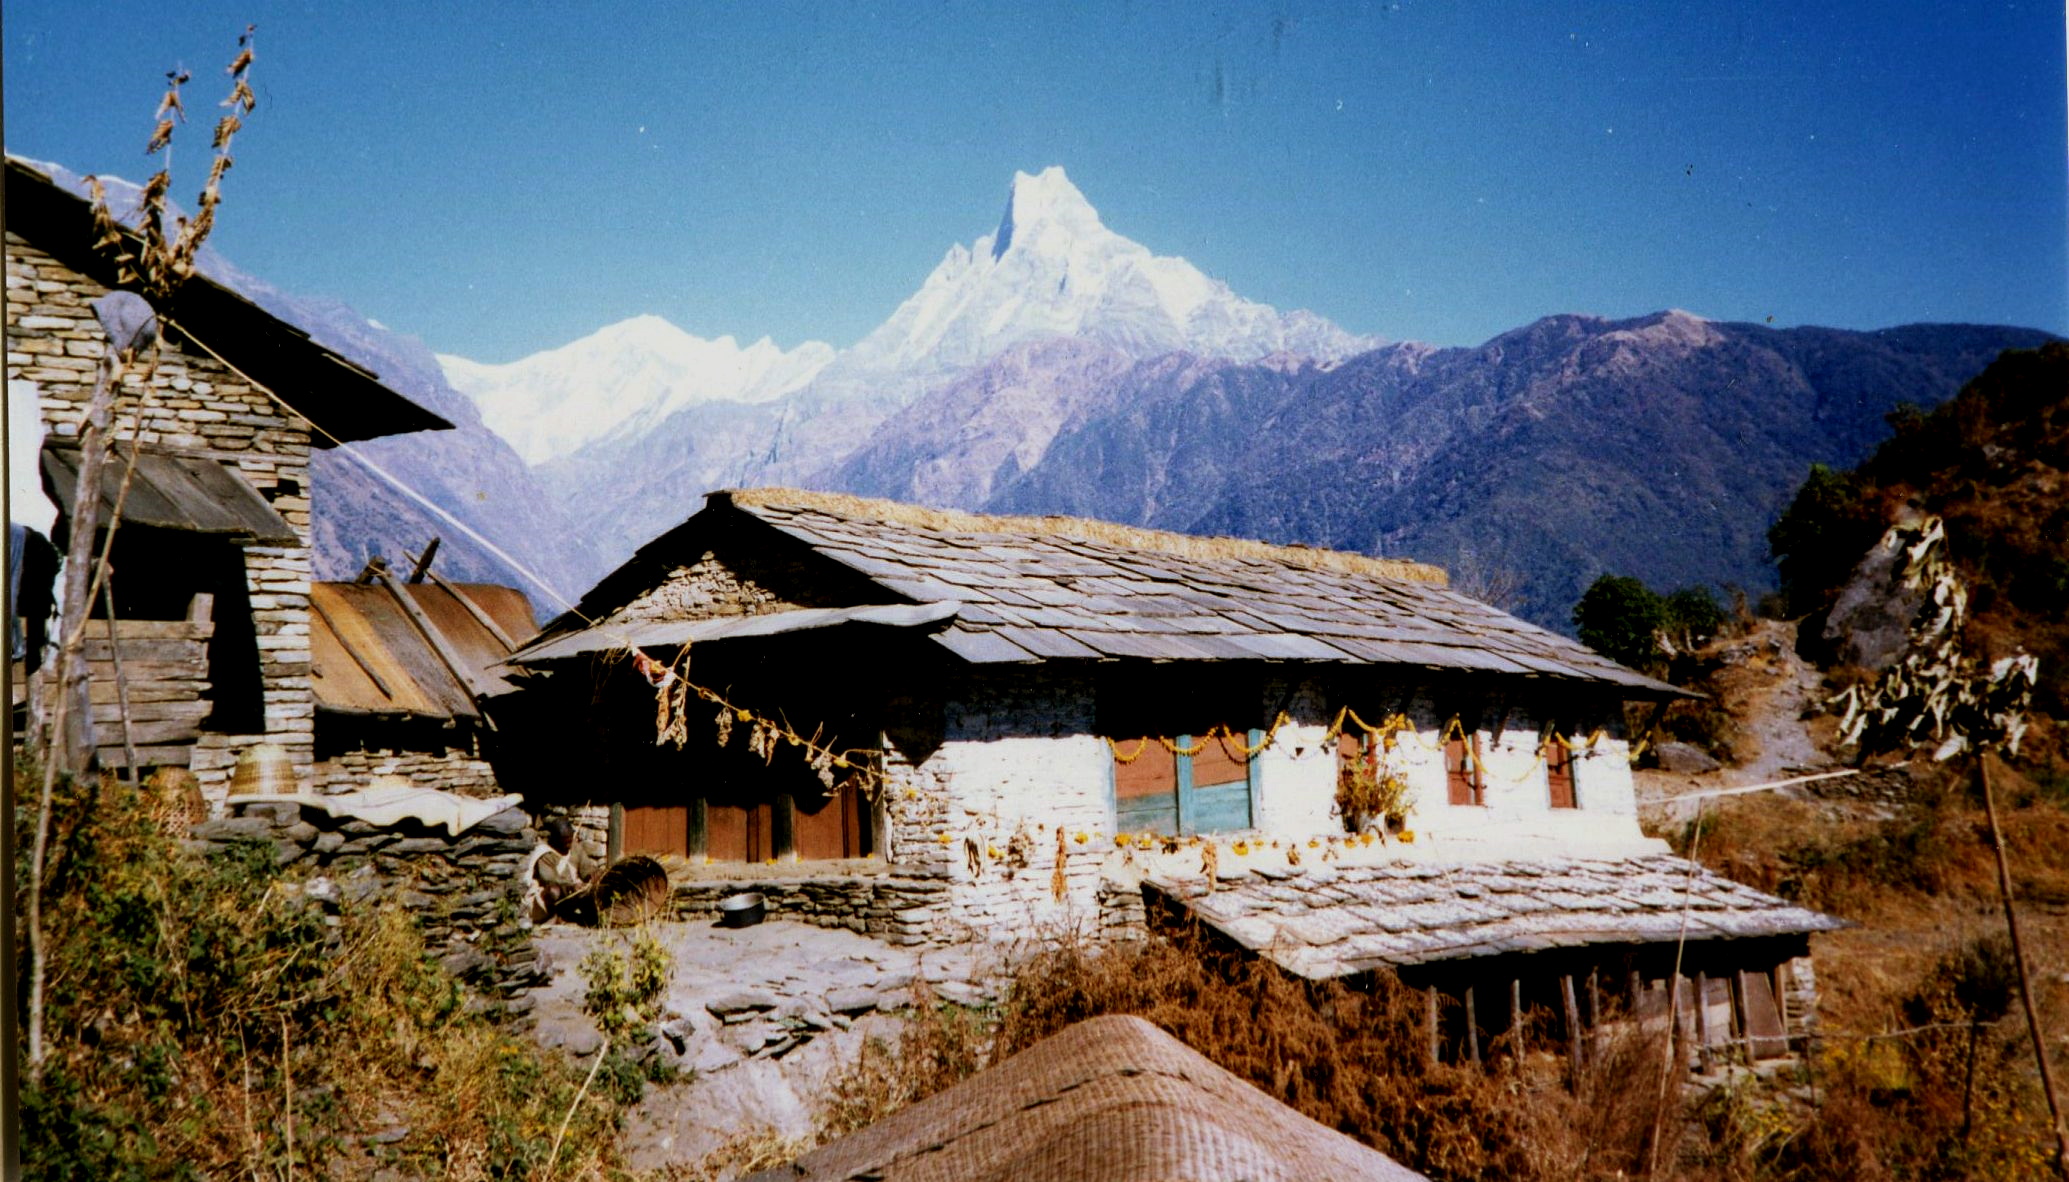 Mount Macchapucchre, The Fishtail Mountain on approach to Gandrung